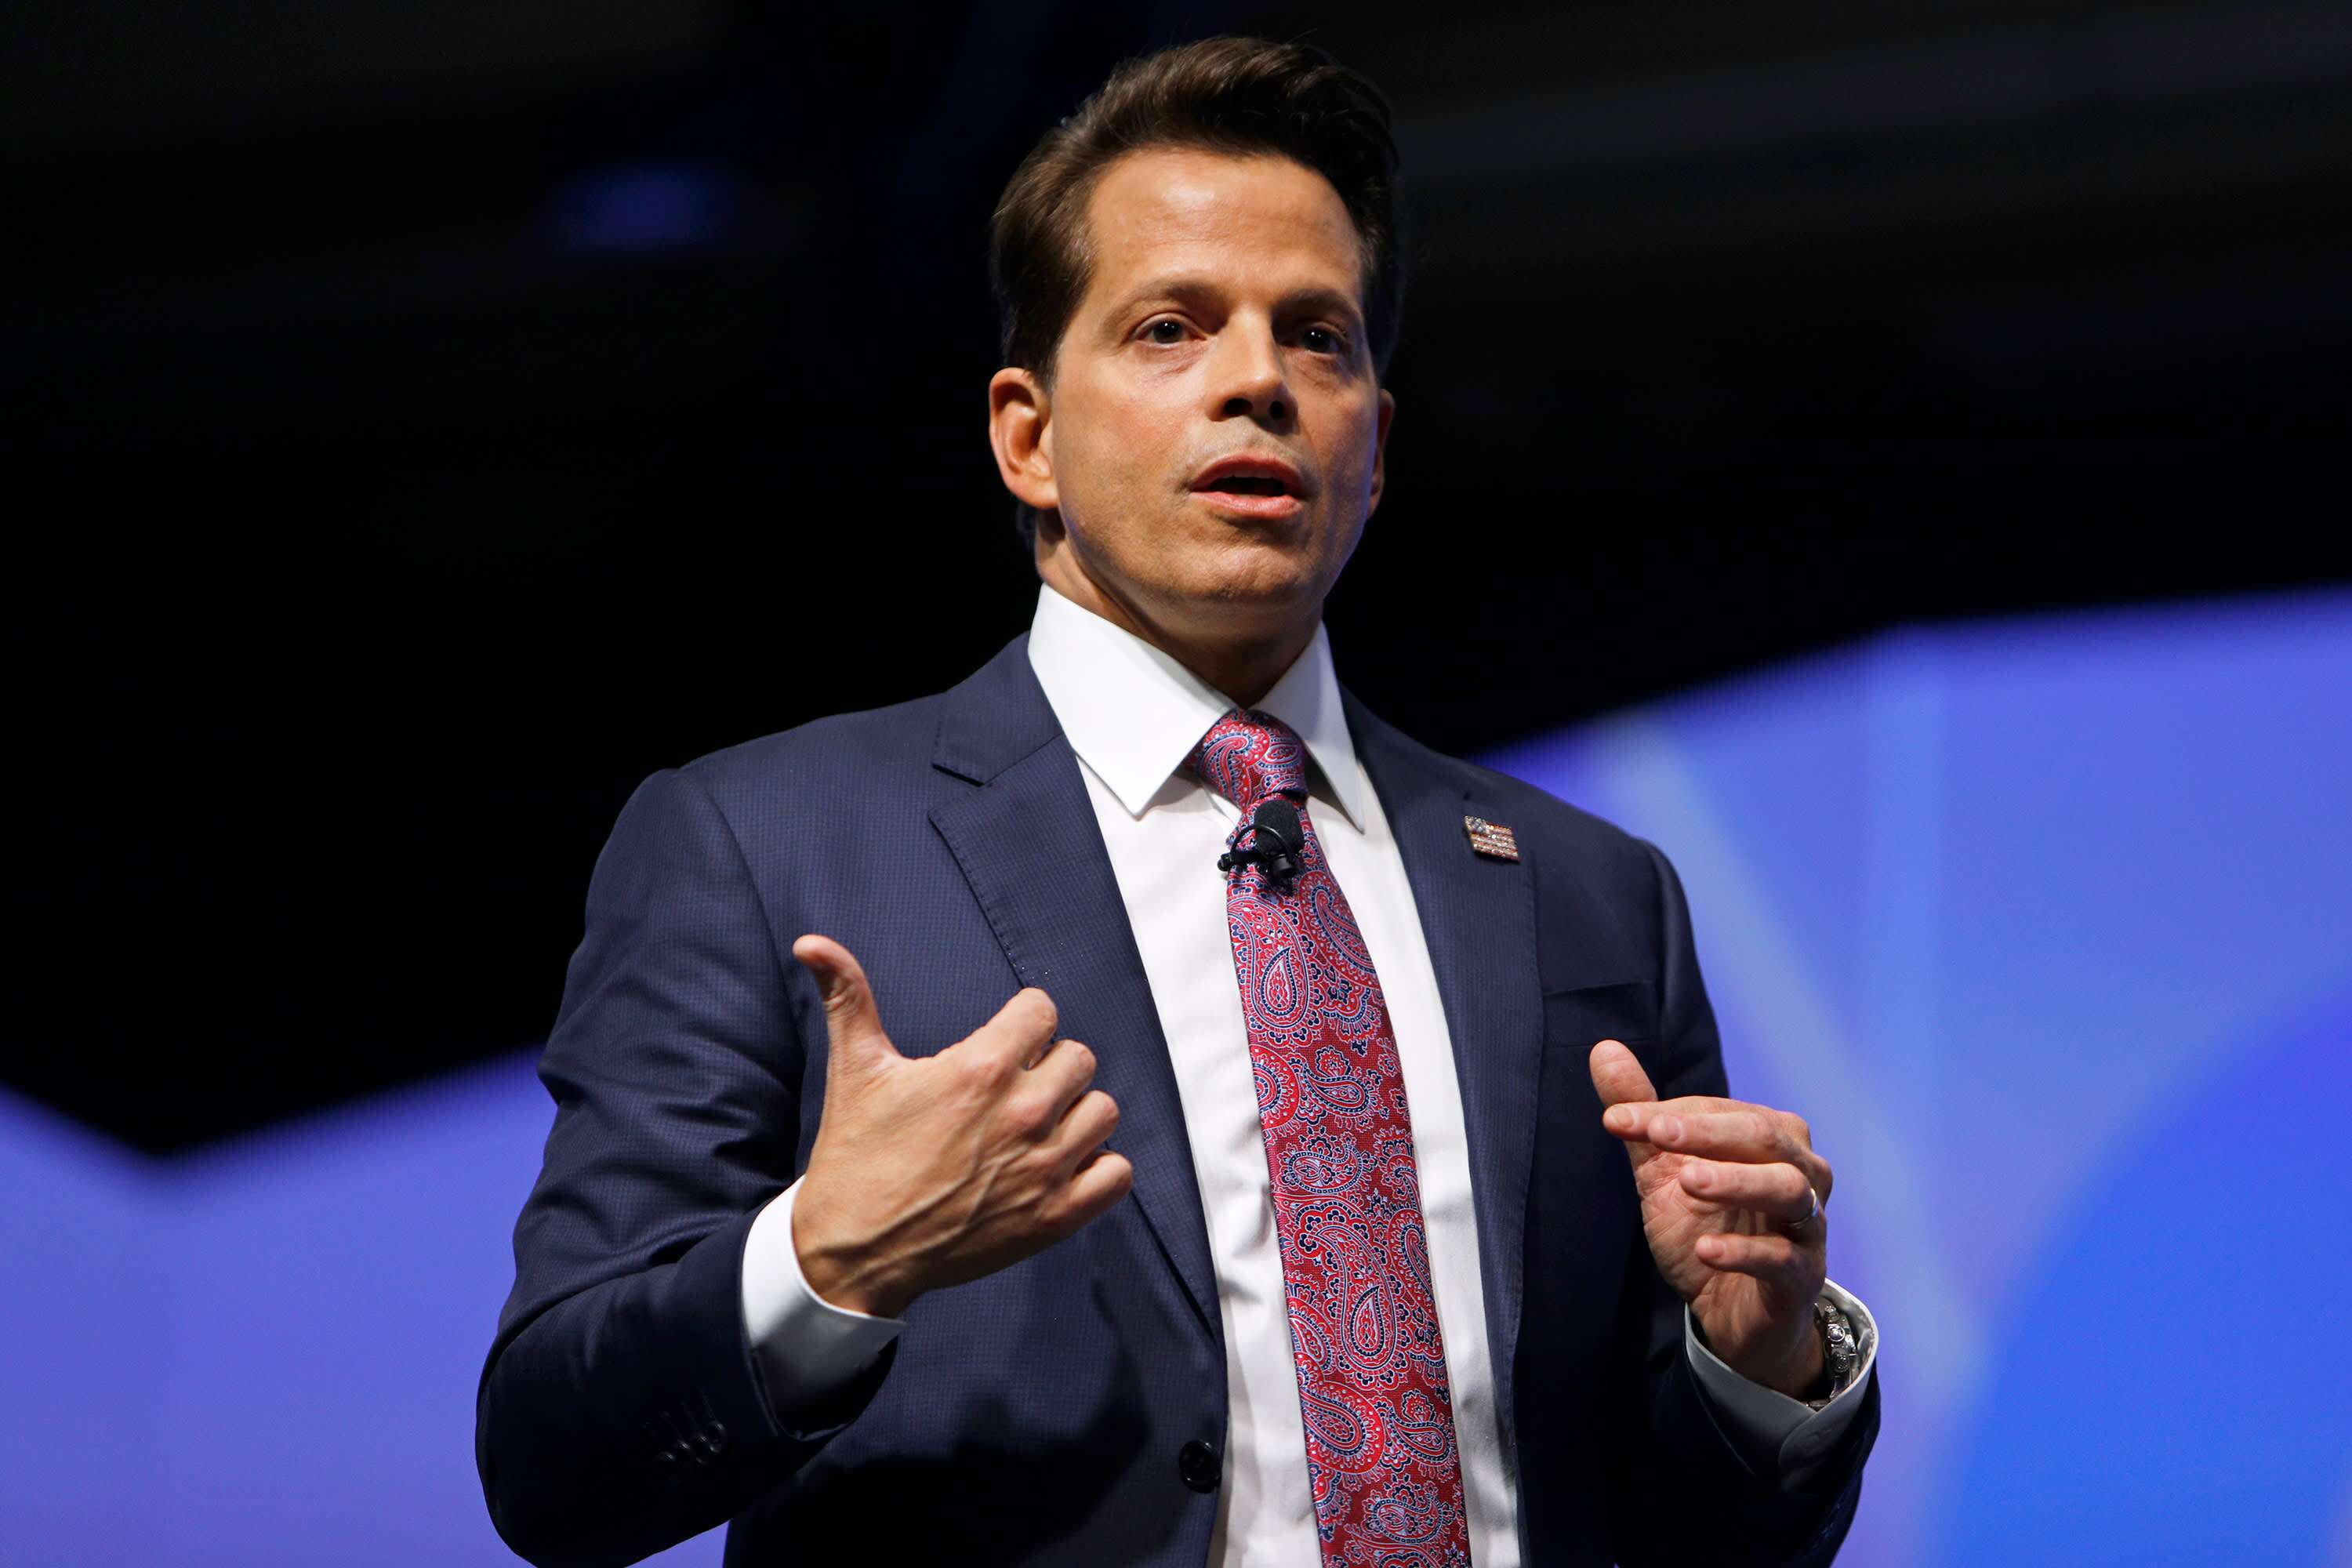 Anthony Scaramucci Urges Investors To Buy Bitcoin, Says It’s Headed For $500K